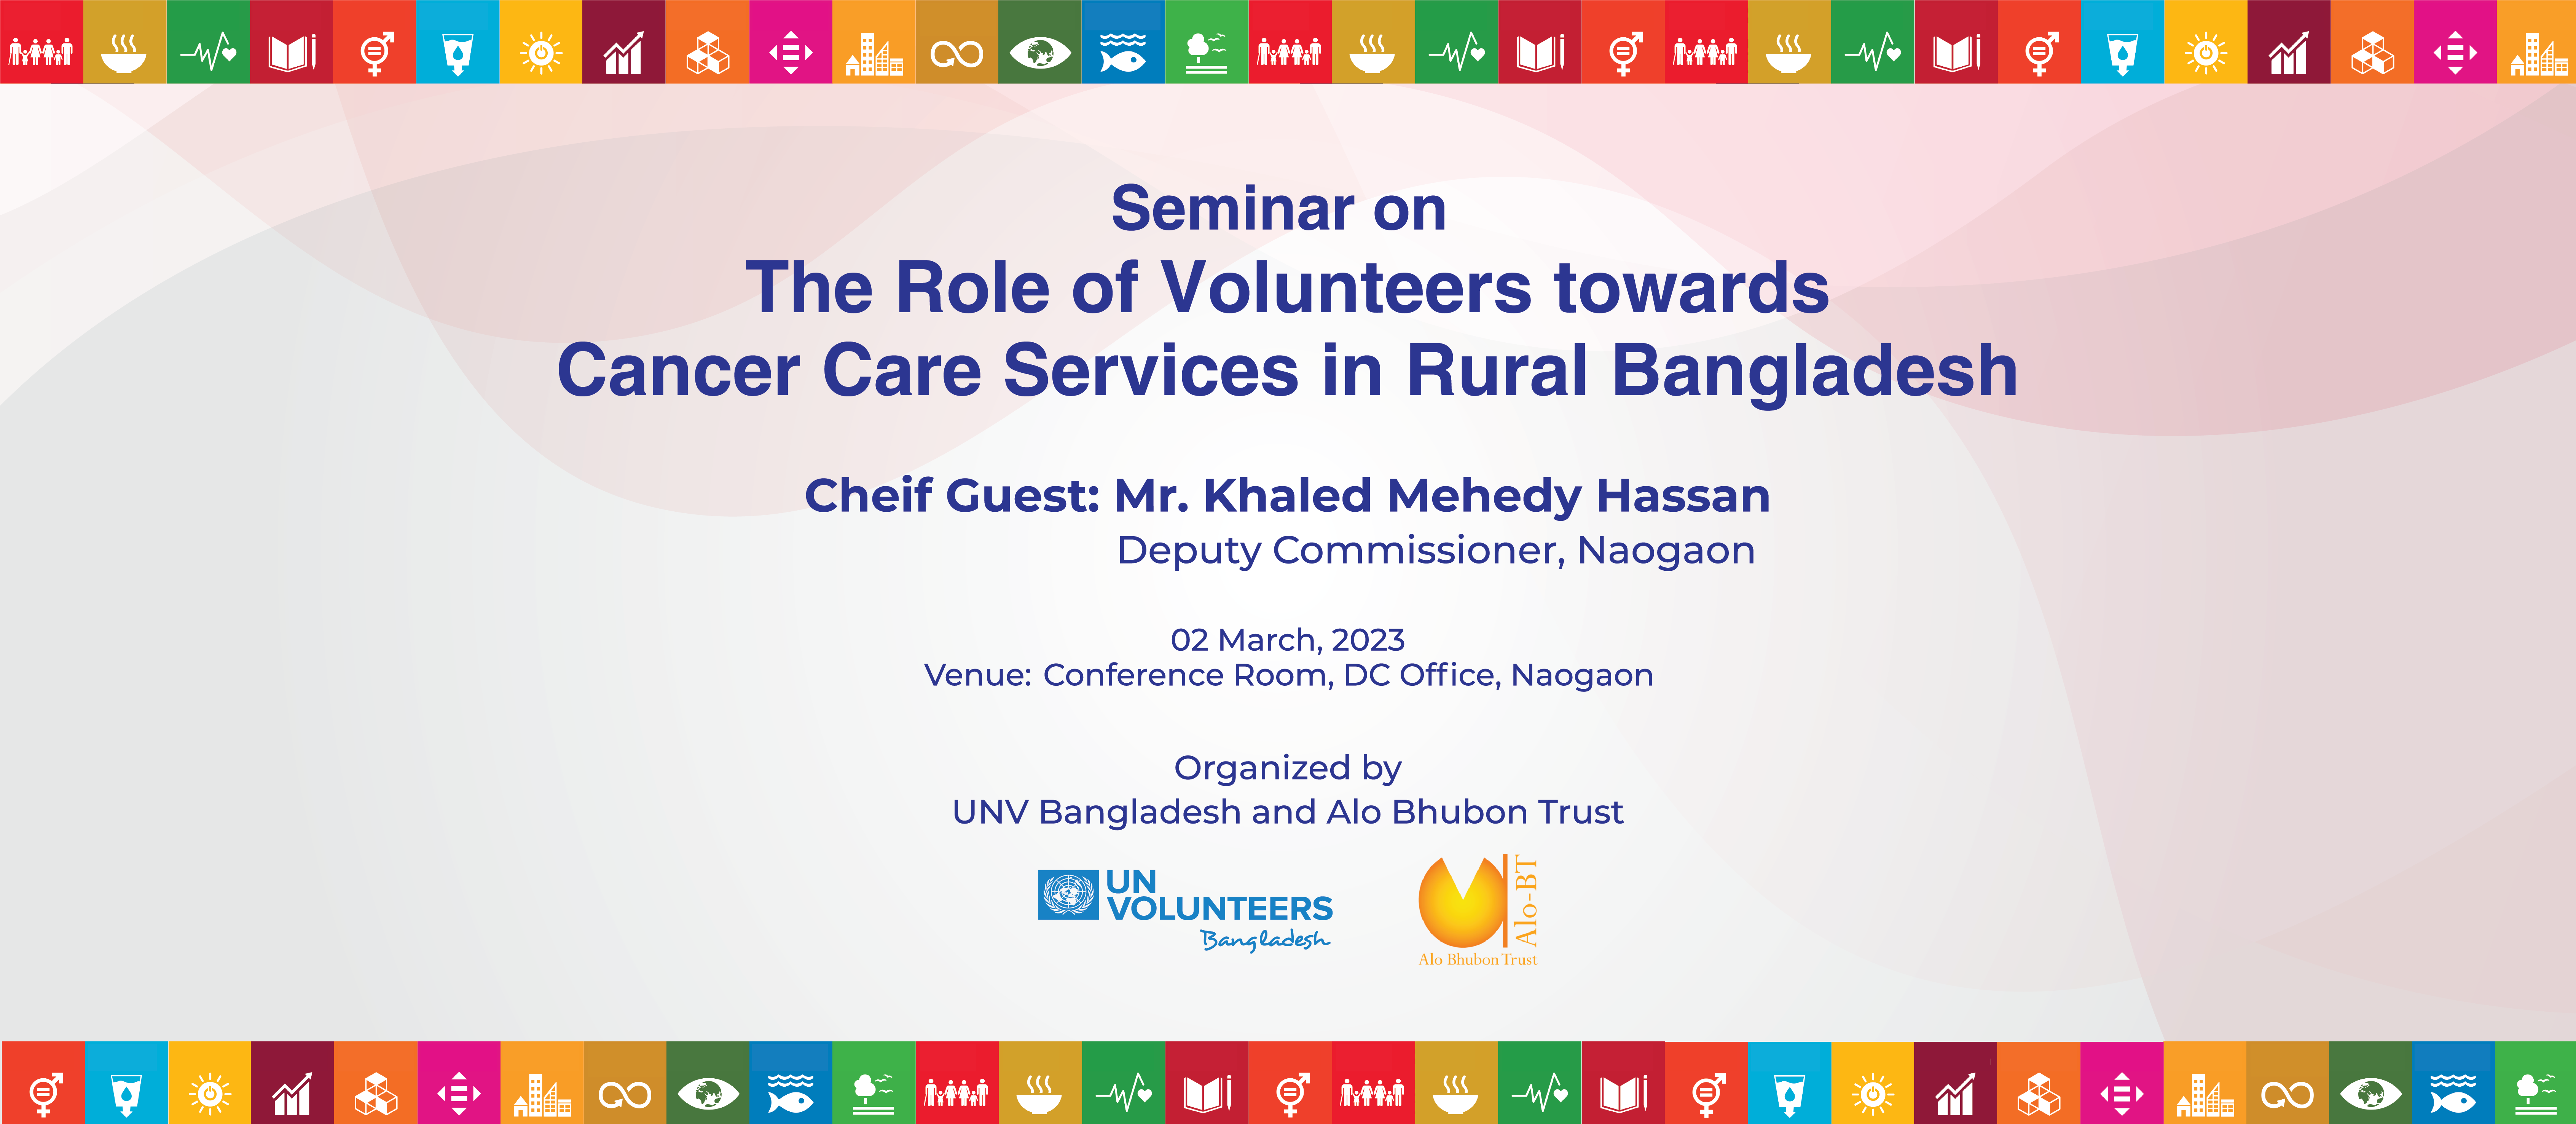 Seminar On The Role of Volunteers Towards Cancer Care Services in Rural Bangladesh